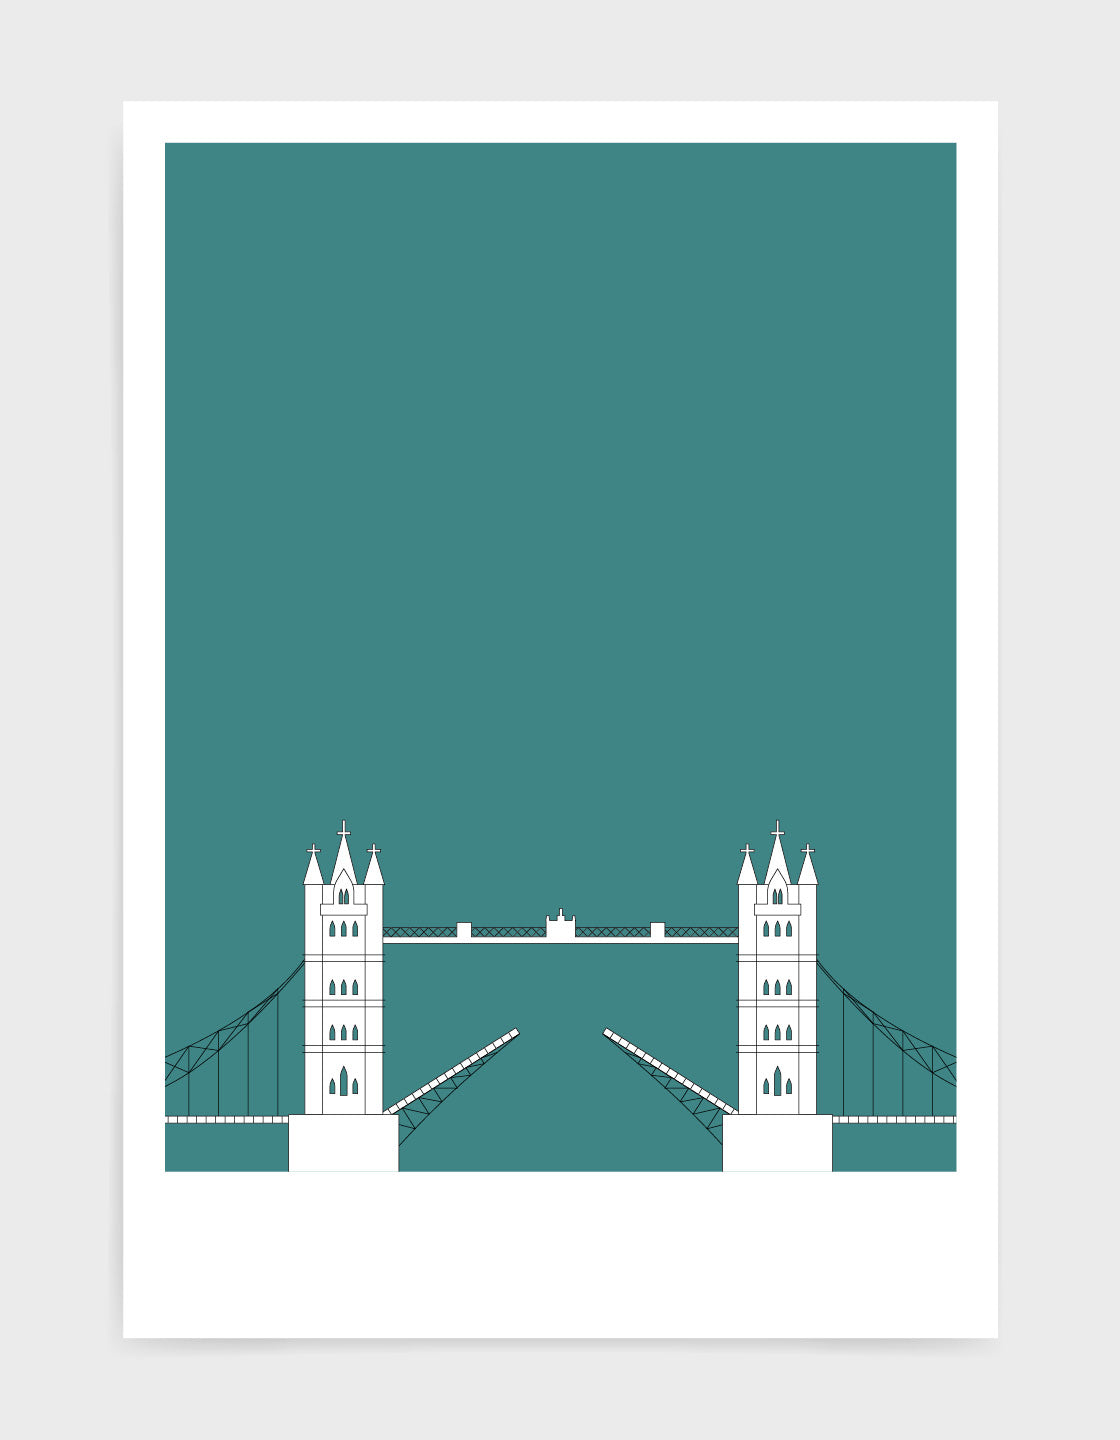 illustration of tower bridge in white against a aqua green background